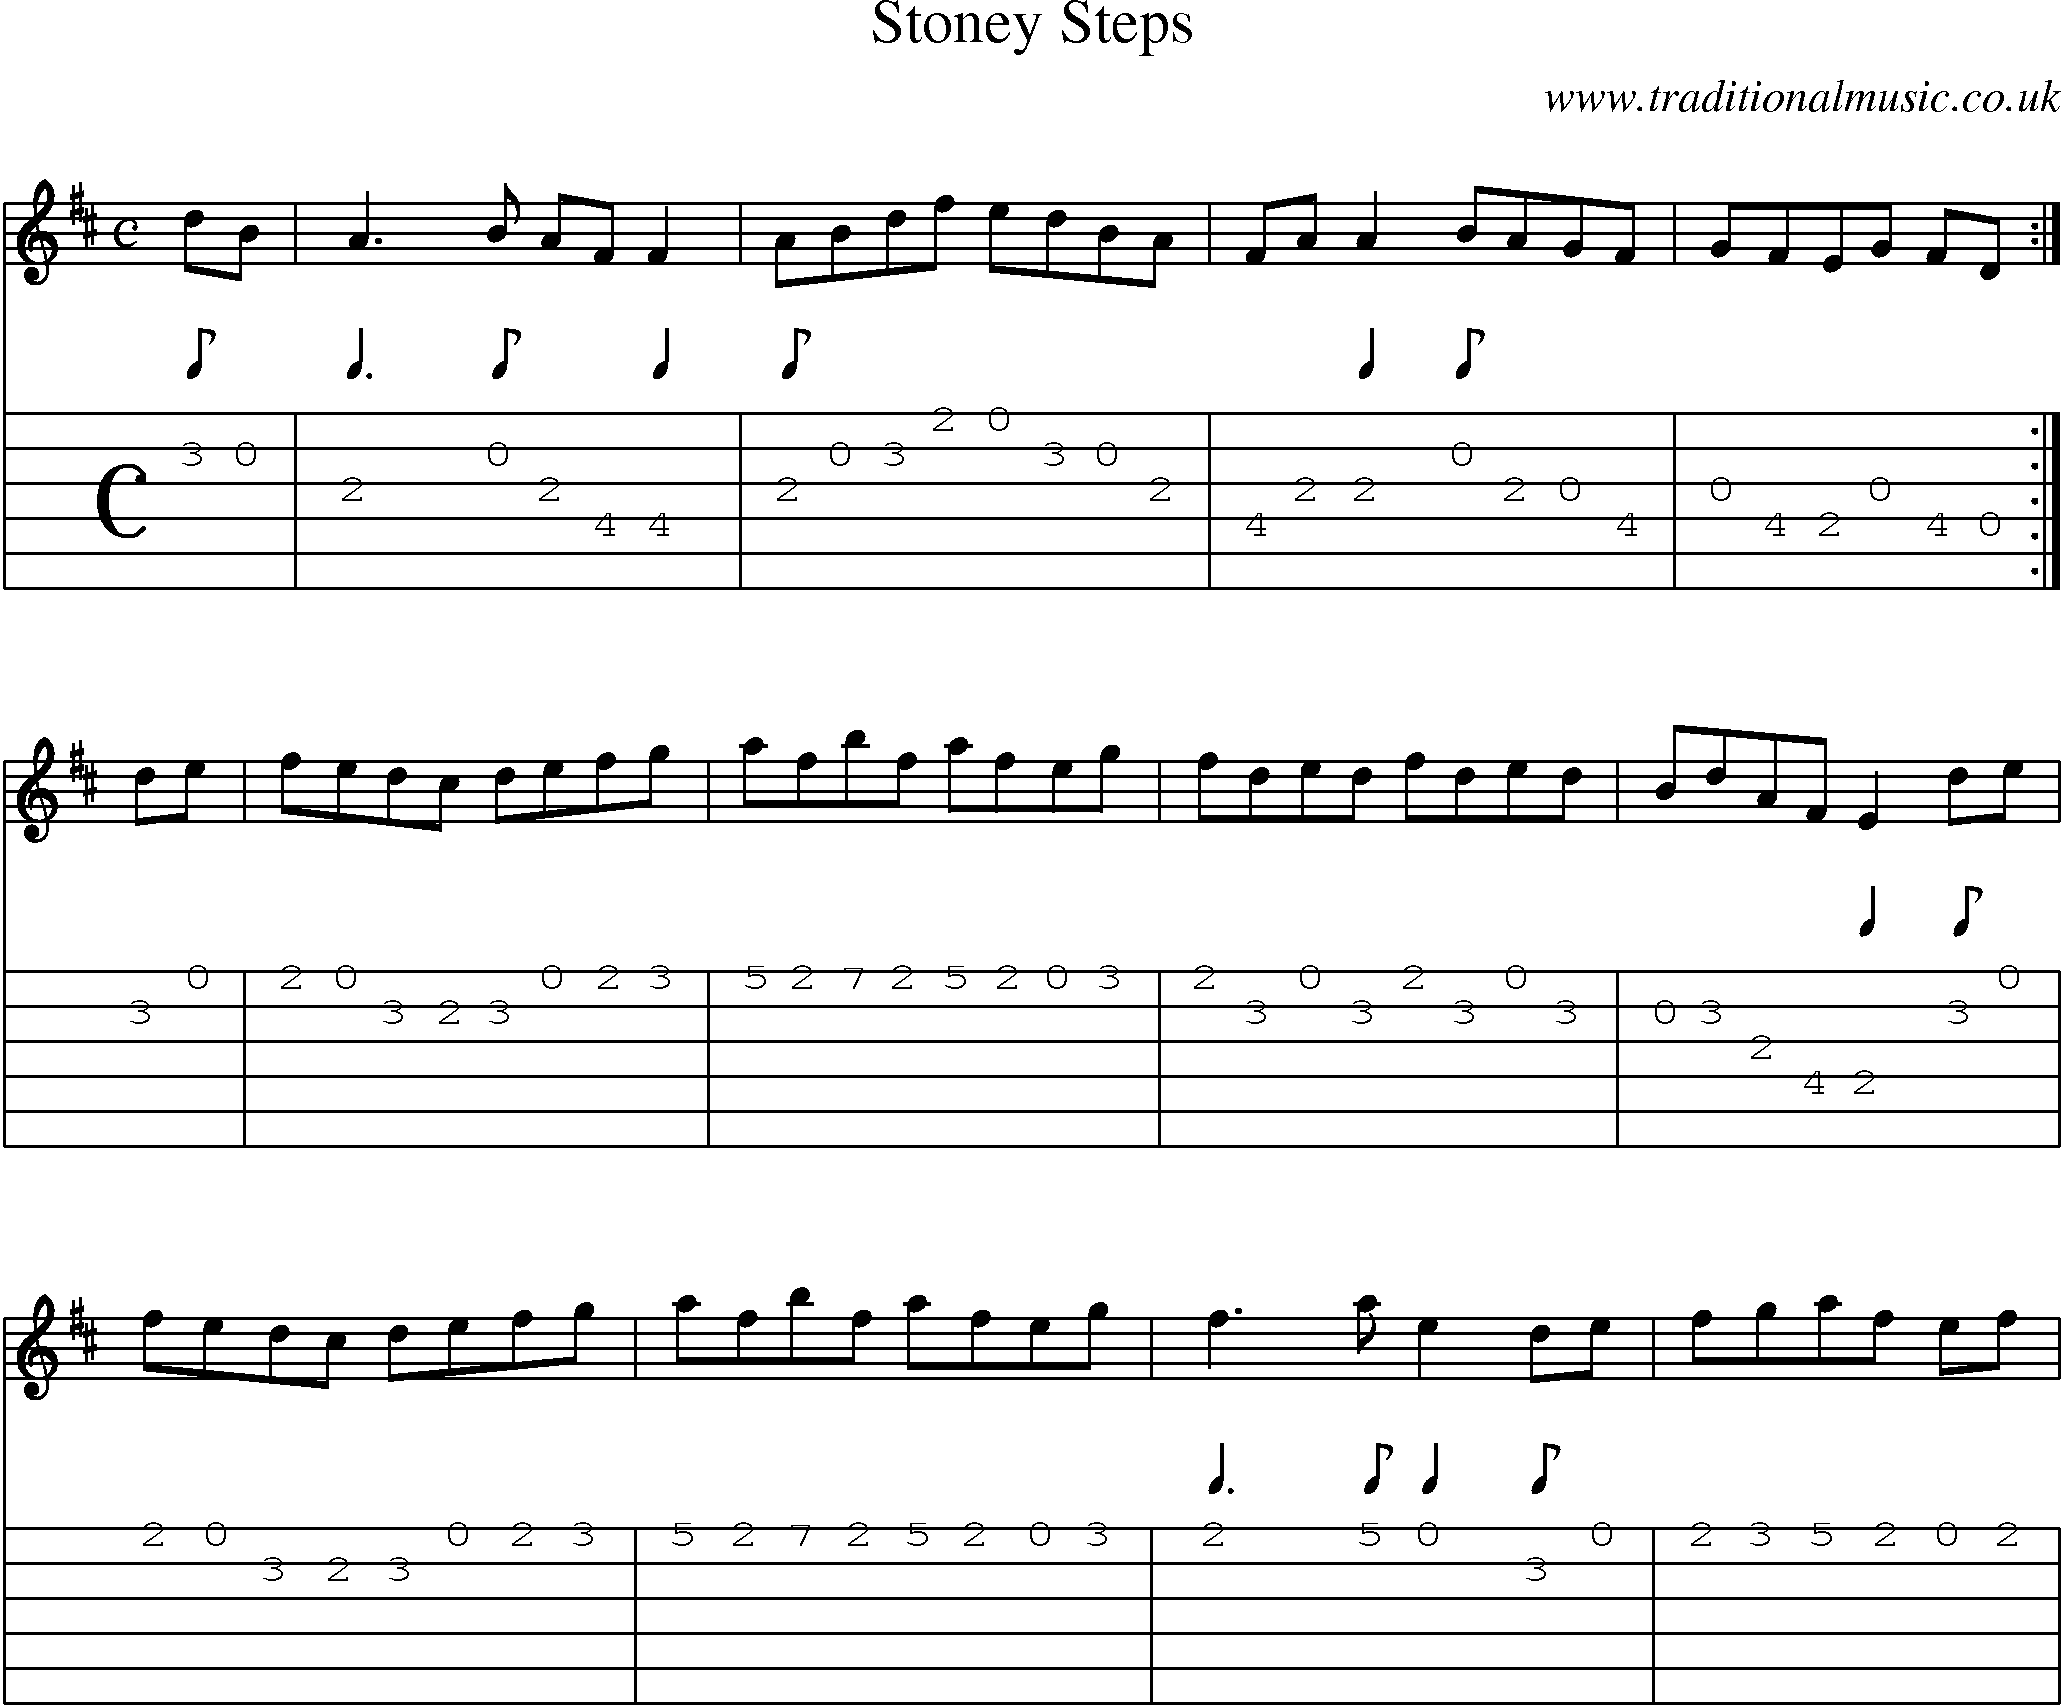 Music Score and Guitar Tabs for Stoney Steps